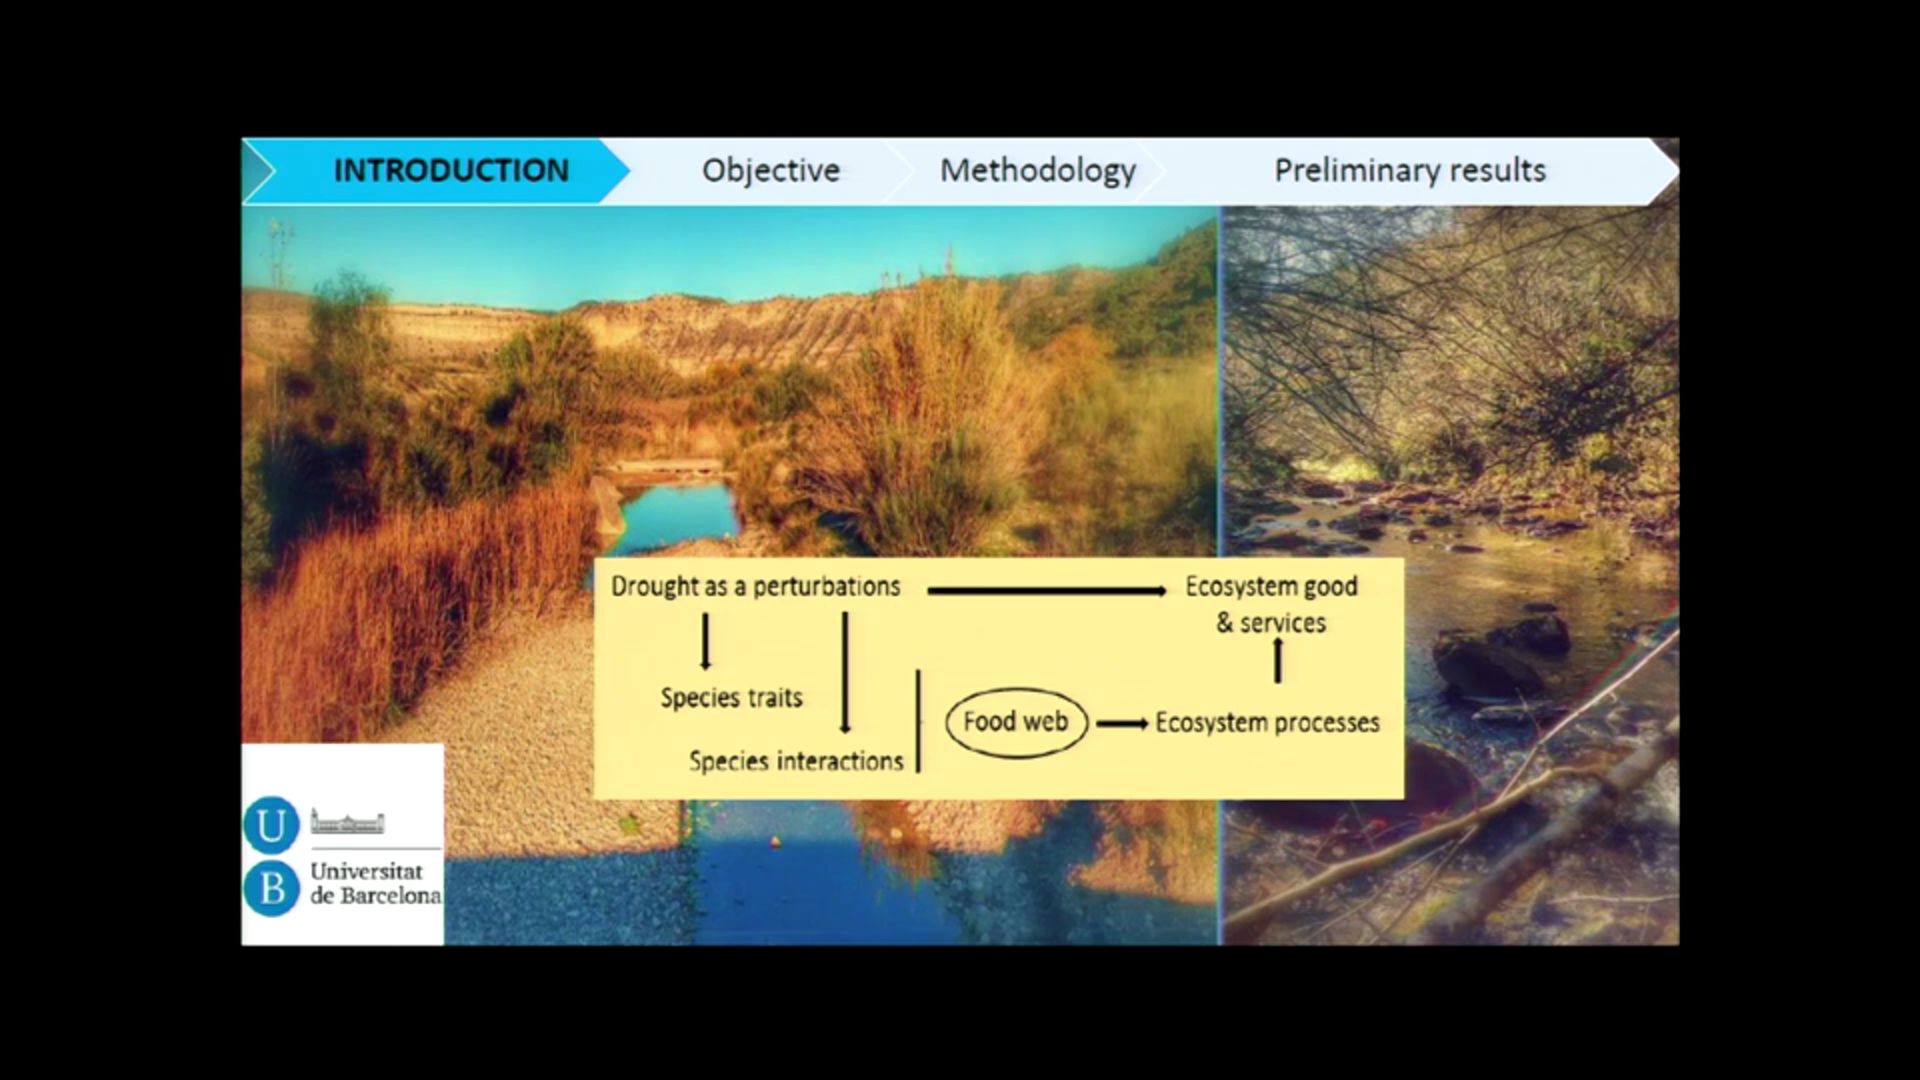 Effects of flow intermittency on aquatic hyphomycetes assemblages in leaf litter, decomposition rates and ...<br/>feeding preferences of invertebrate consumers